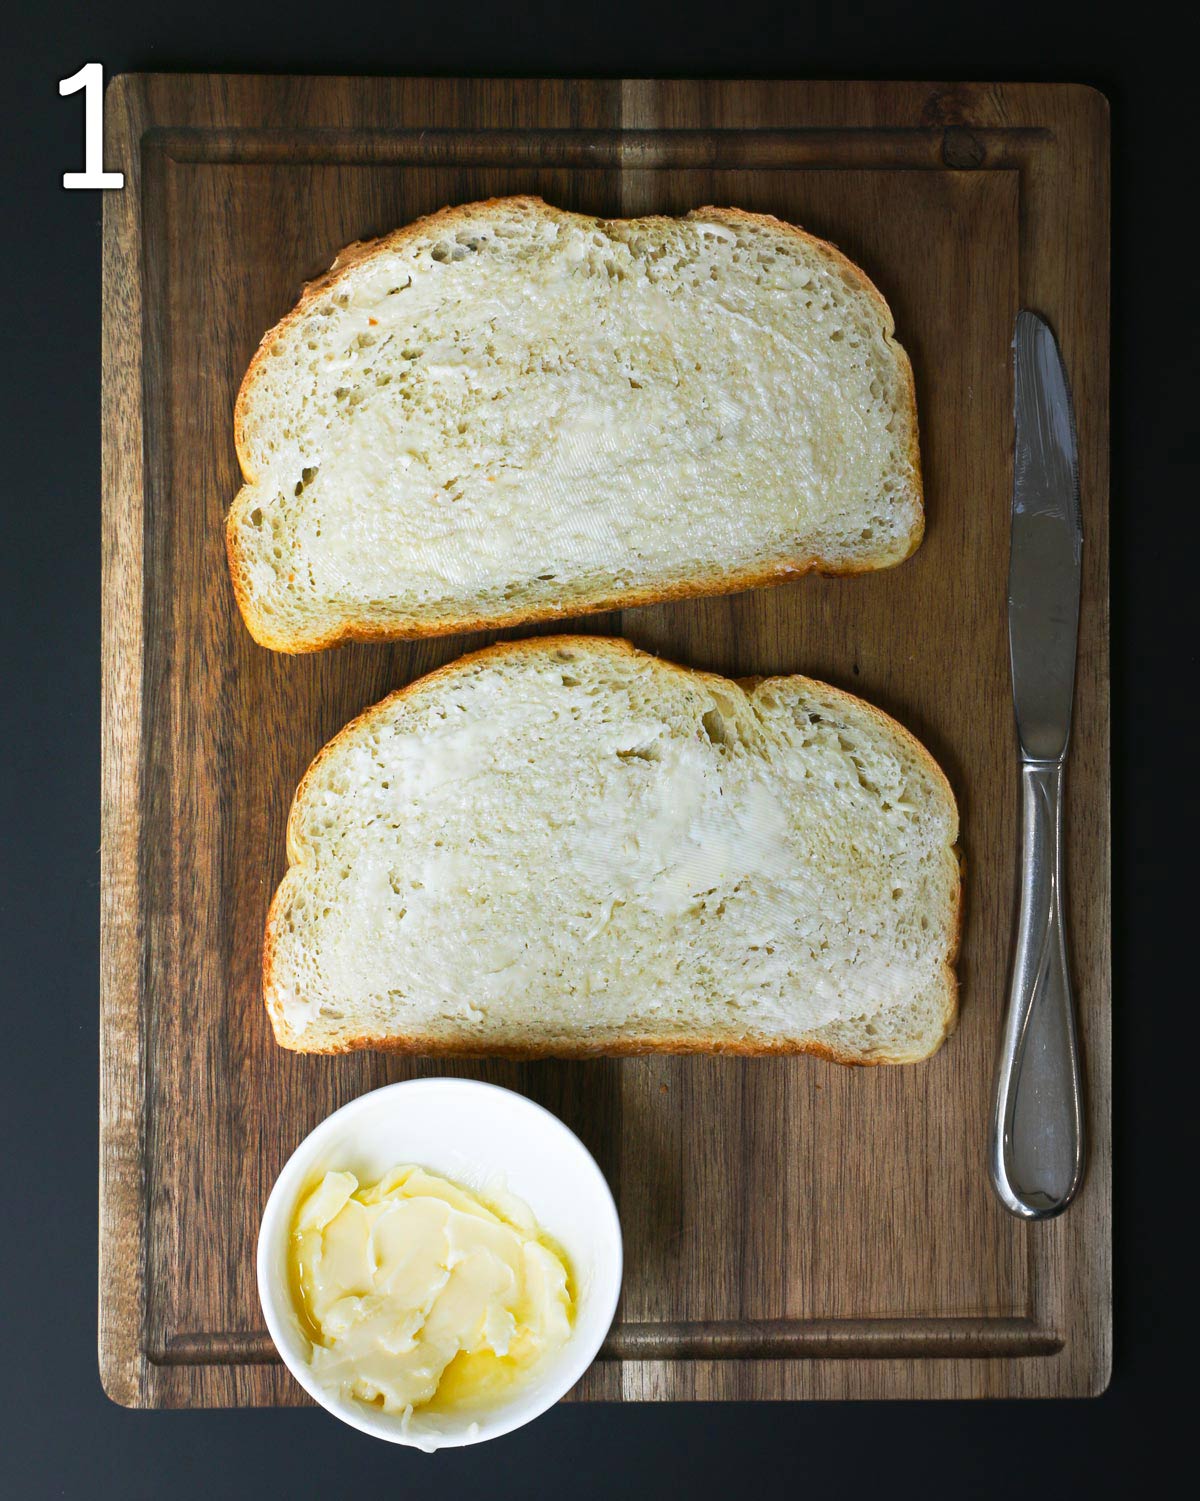 two slices of buttered bread on board with knife and dish of butter.